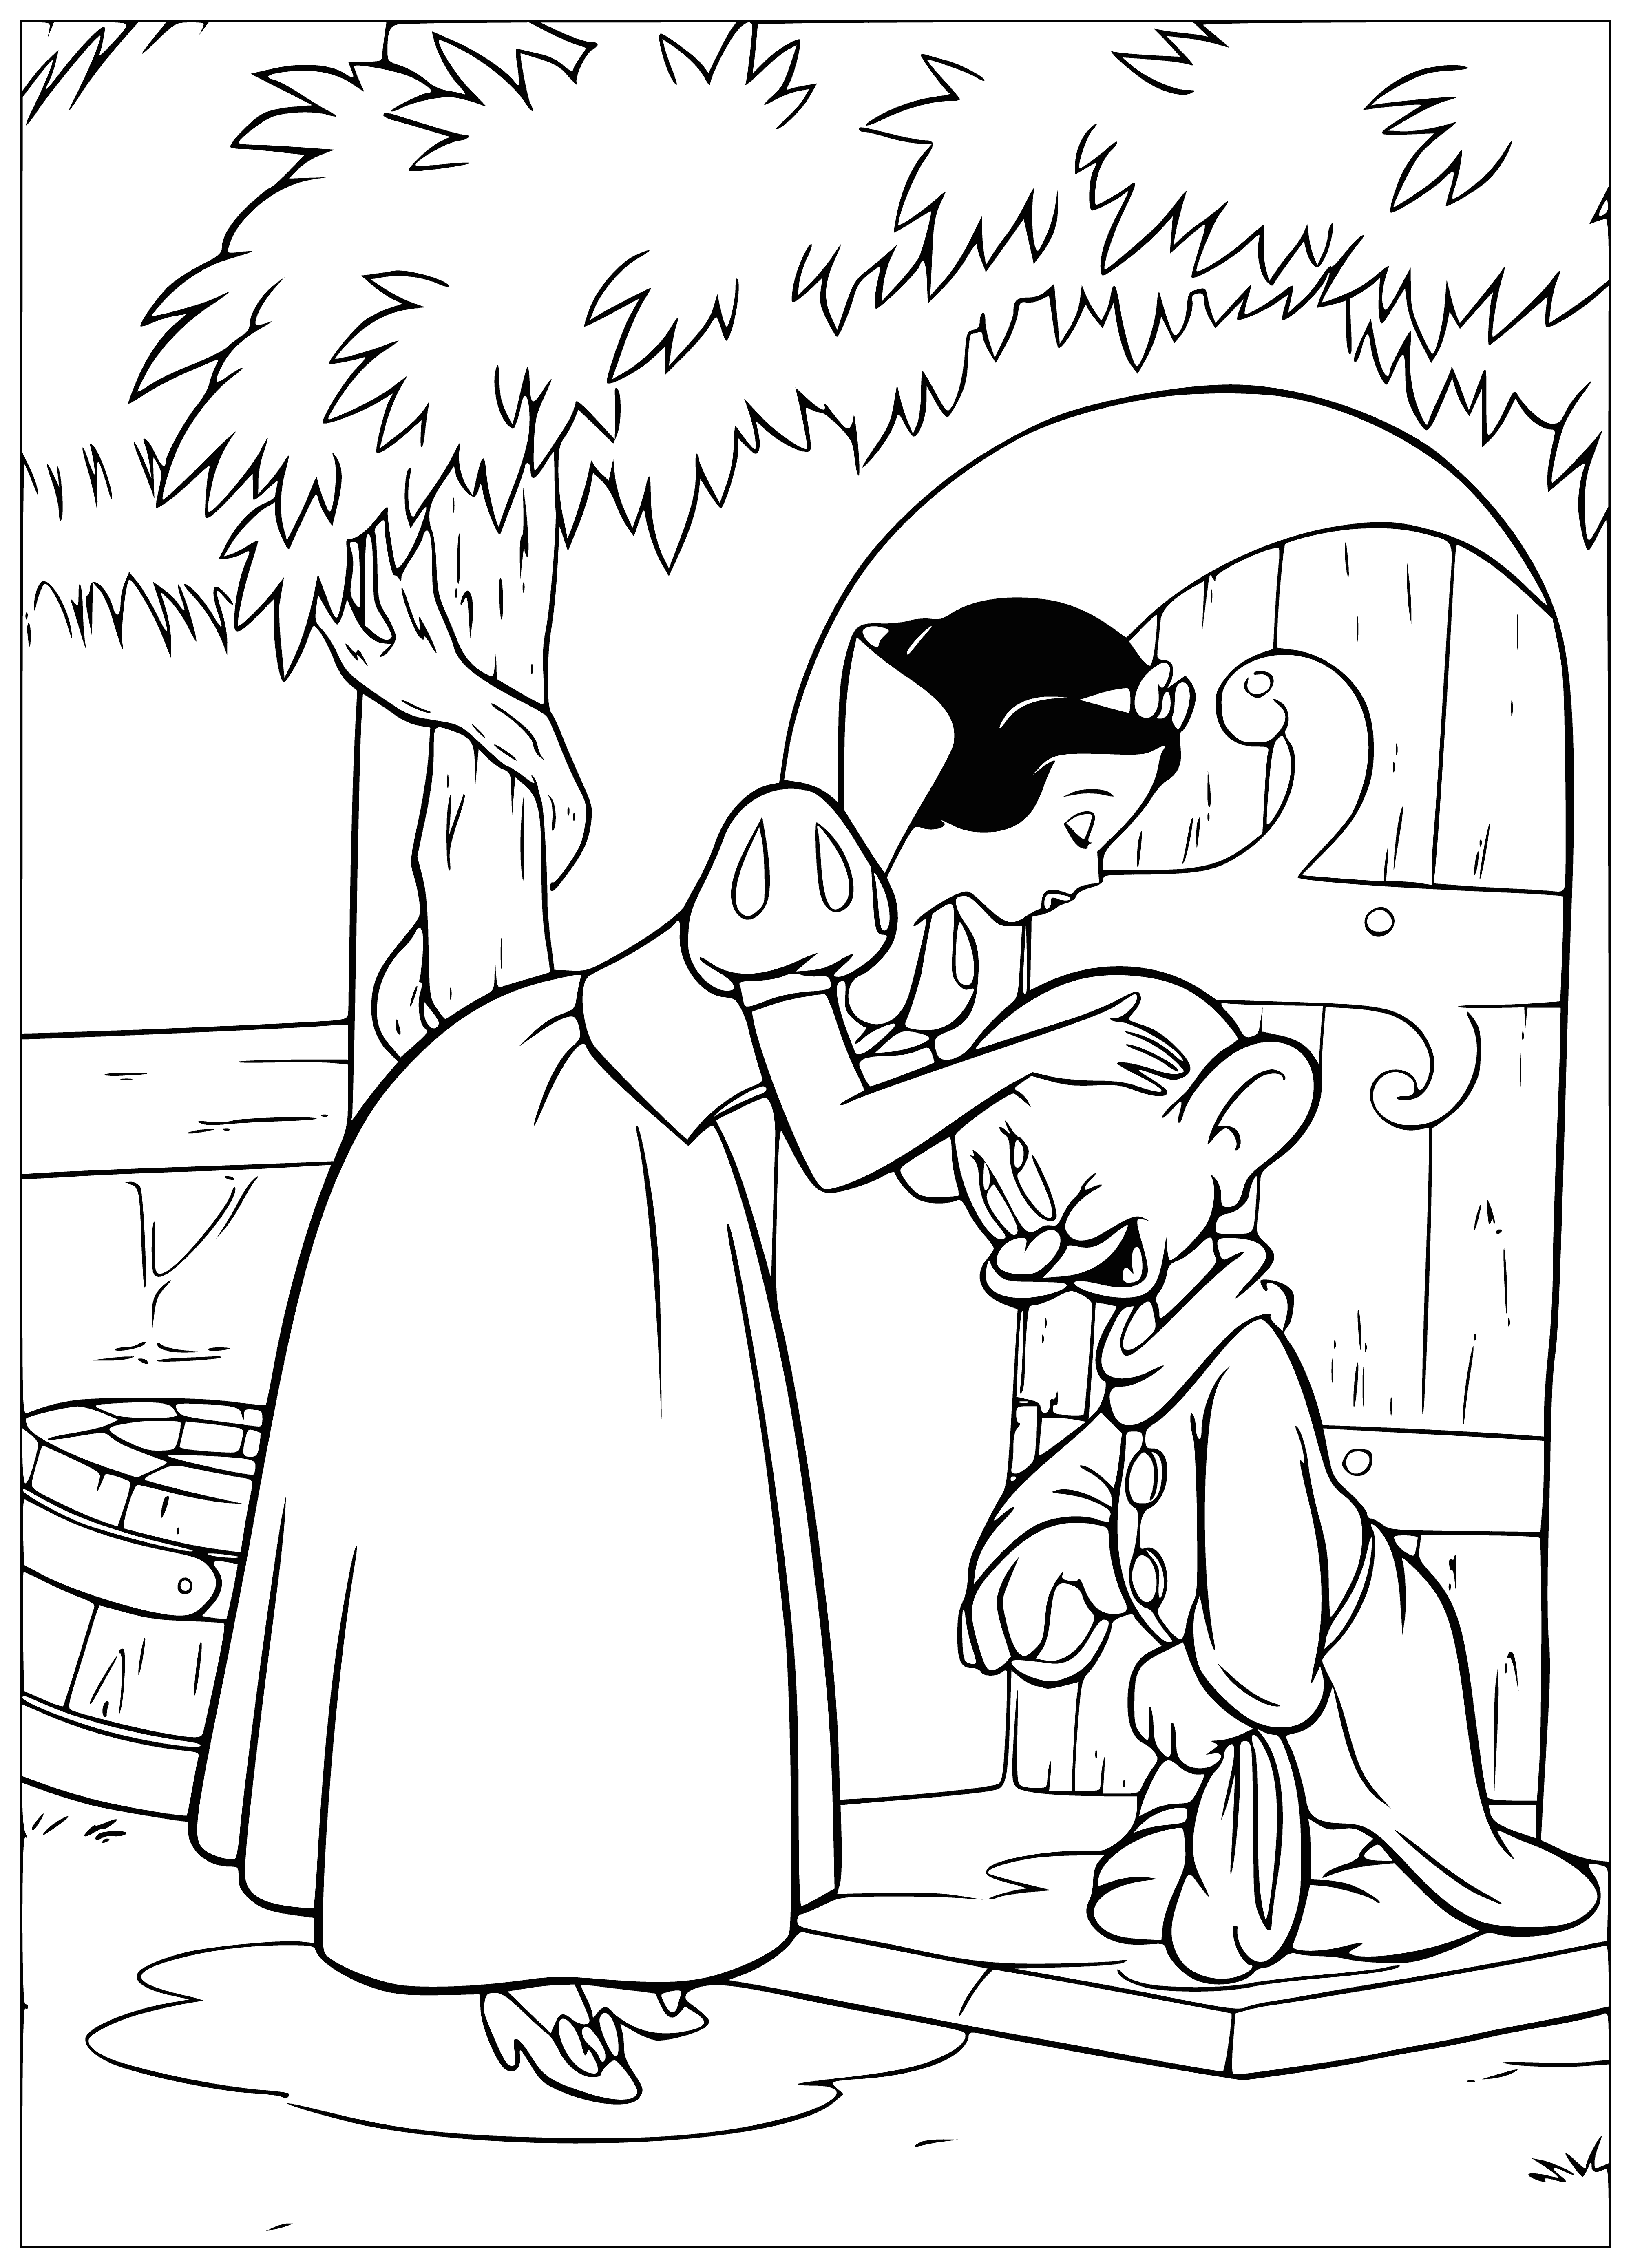 coloring page: Dwarfs love Snow White and always want to keep her safe.